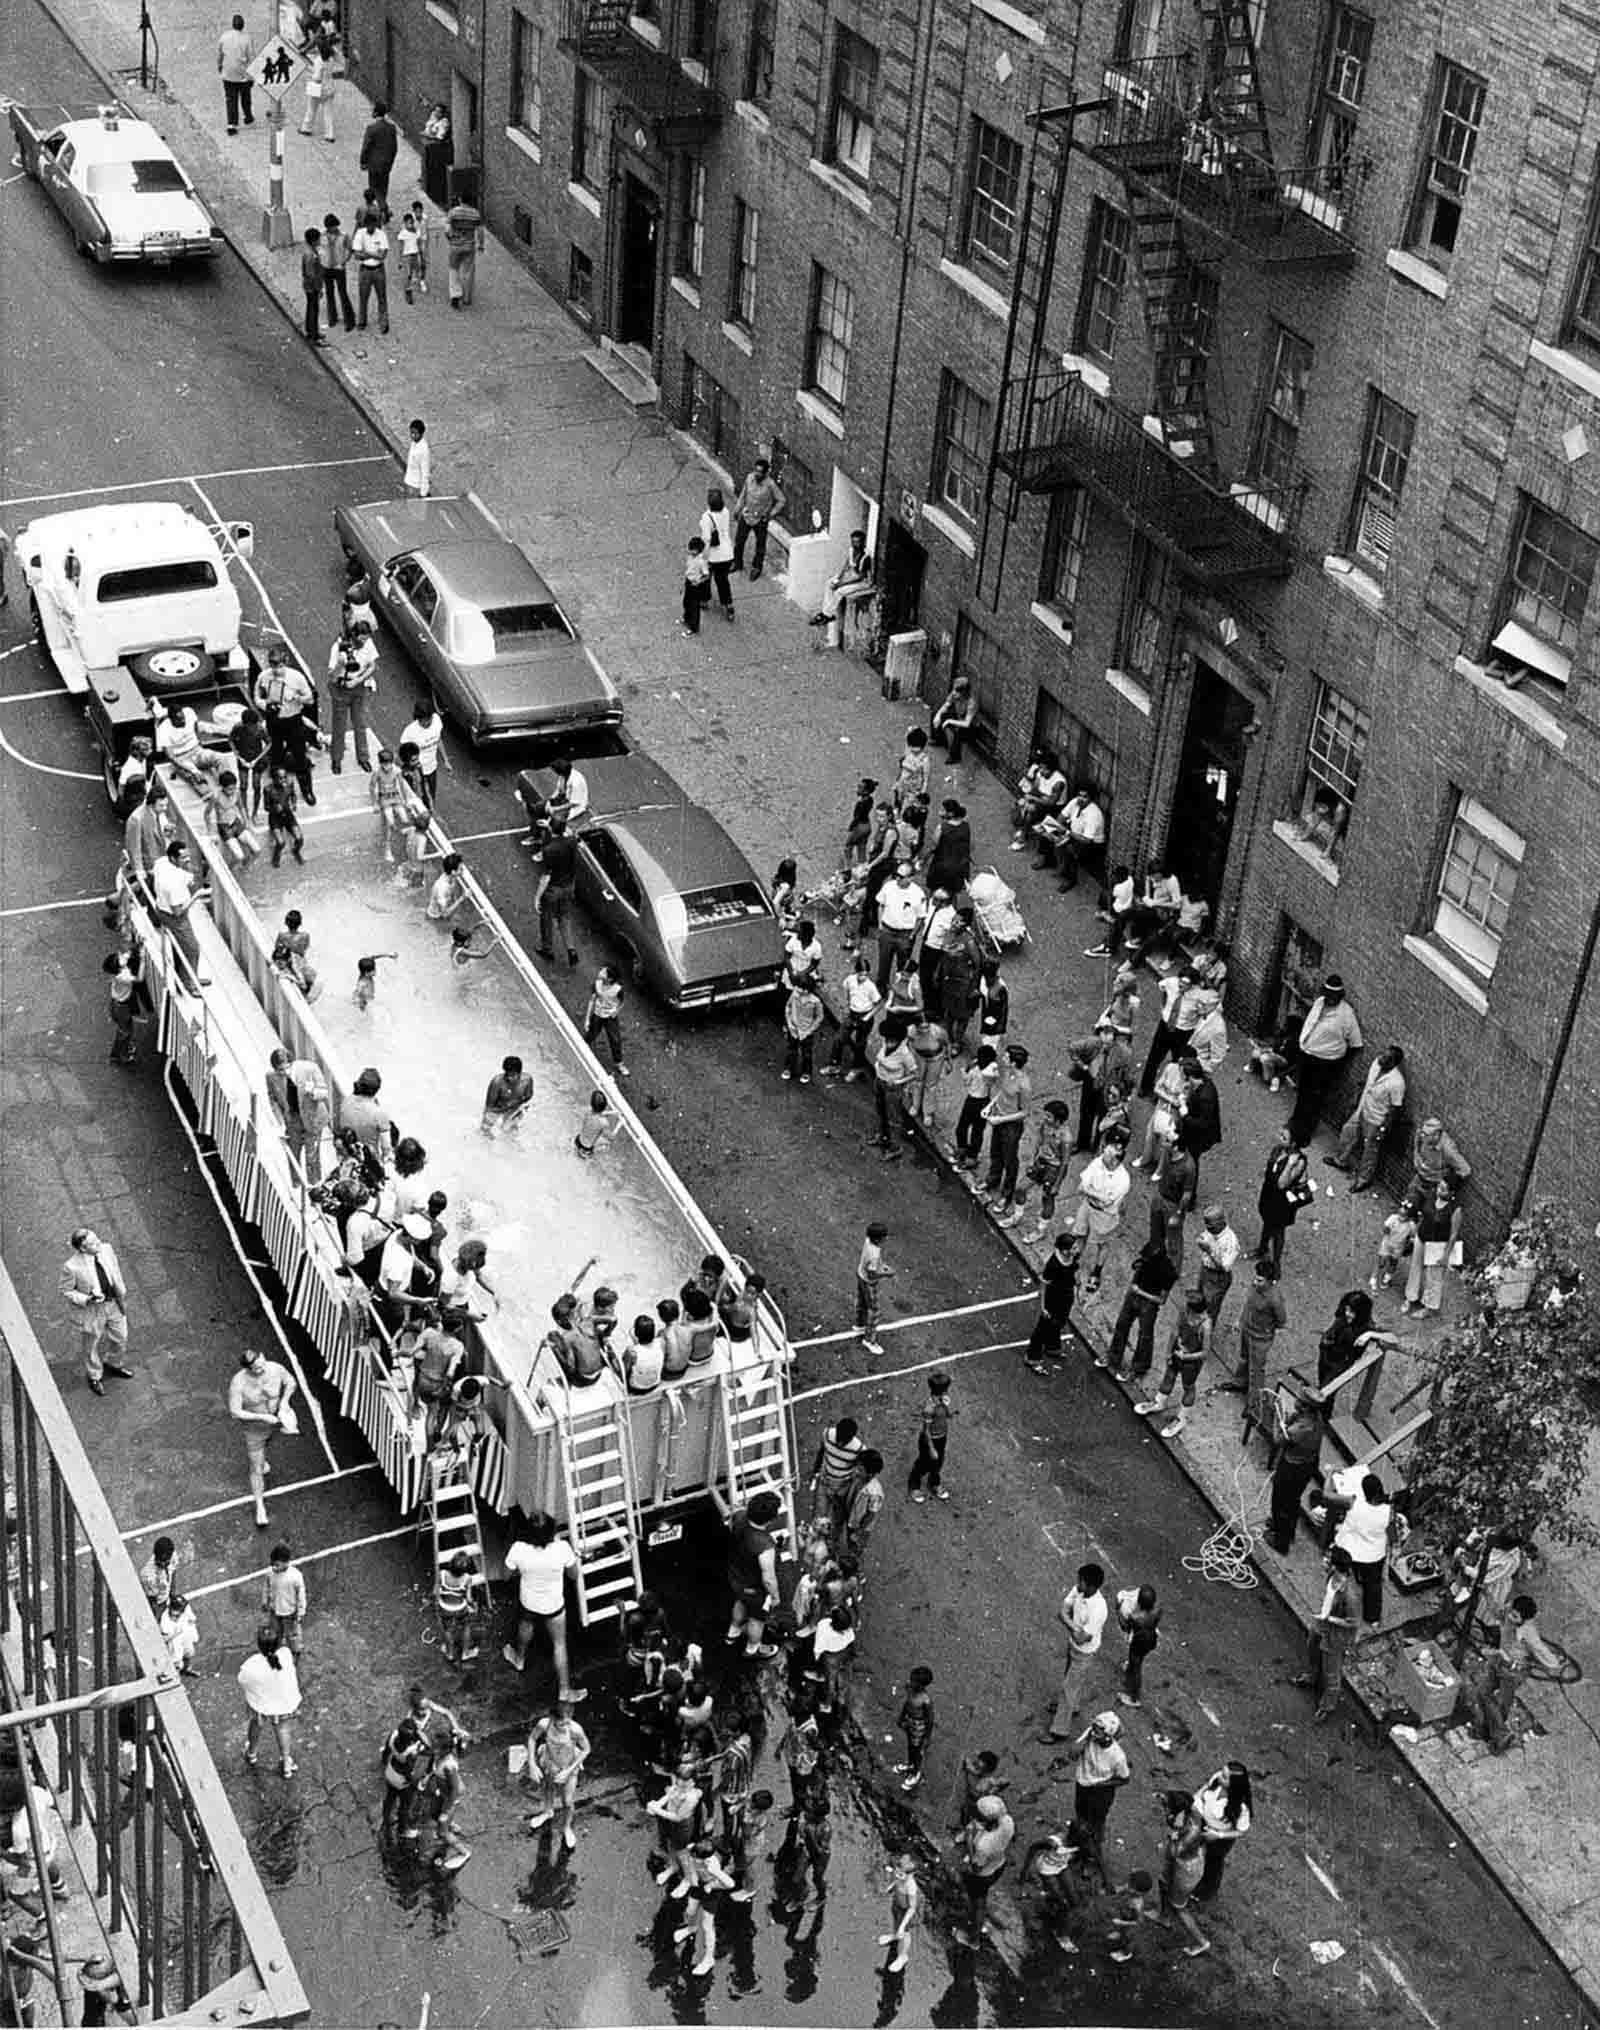 Dozens of children and adults crowded in and around what was called a ‘swimmobile’ in the late 1960s.